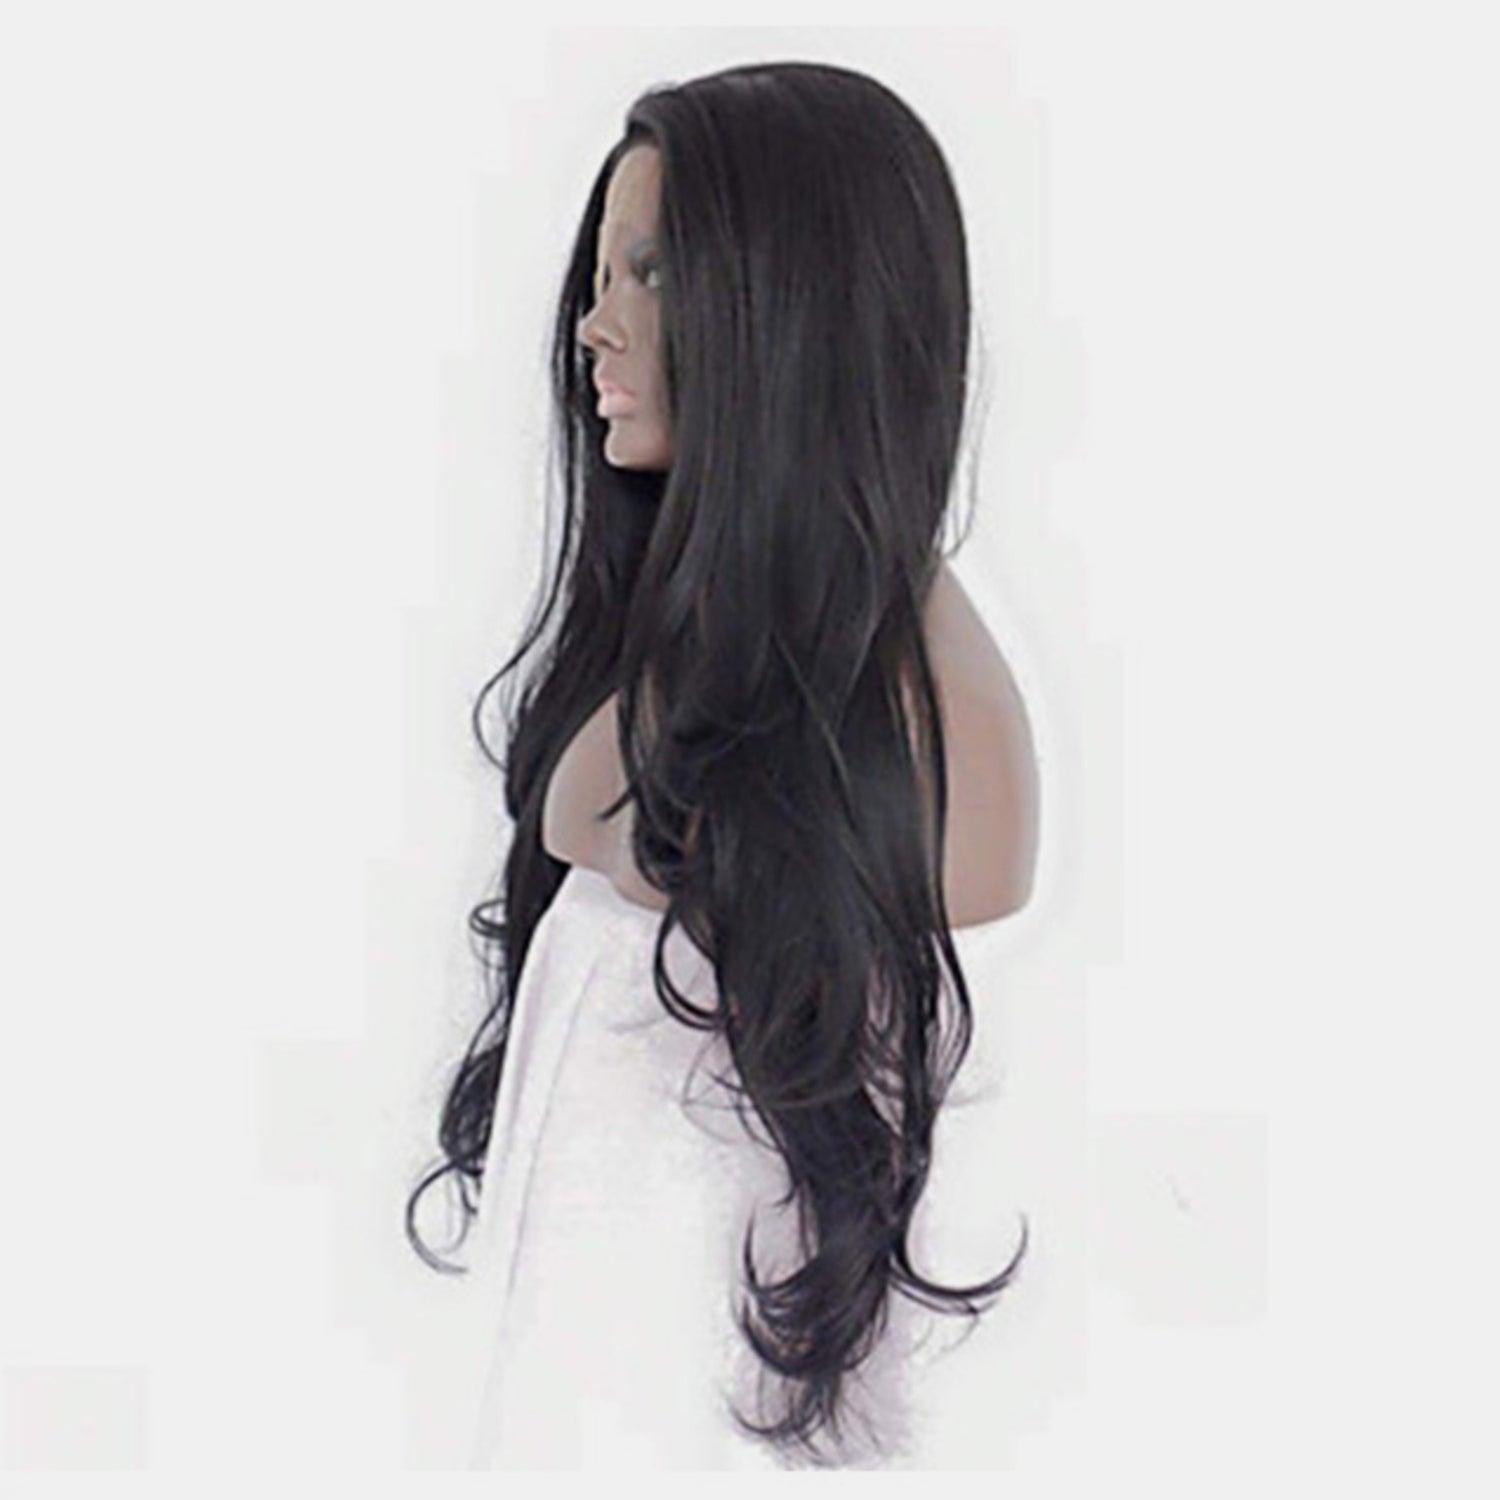 a woman's long black wig on a mannequin head